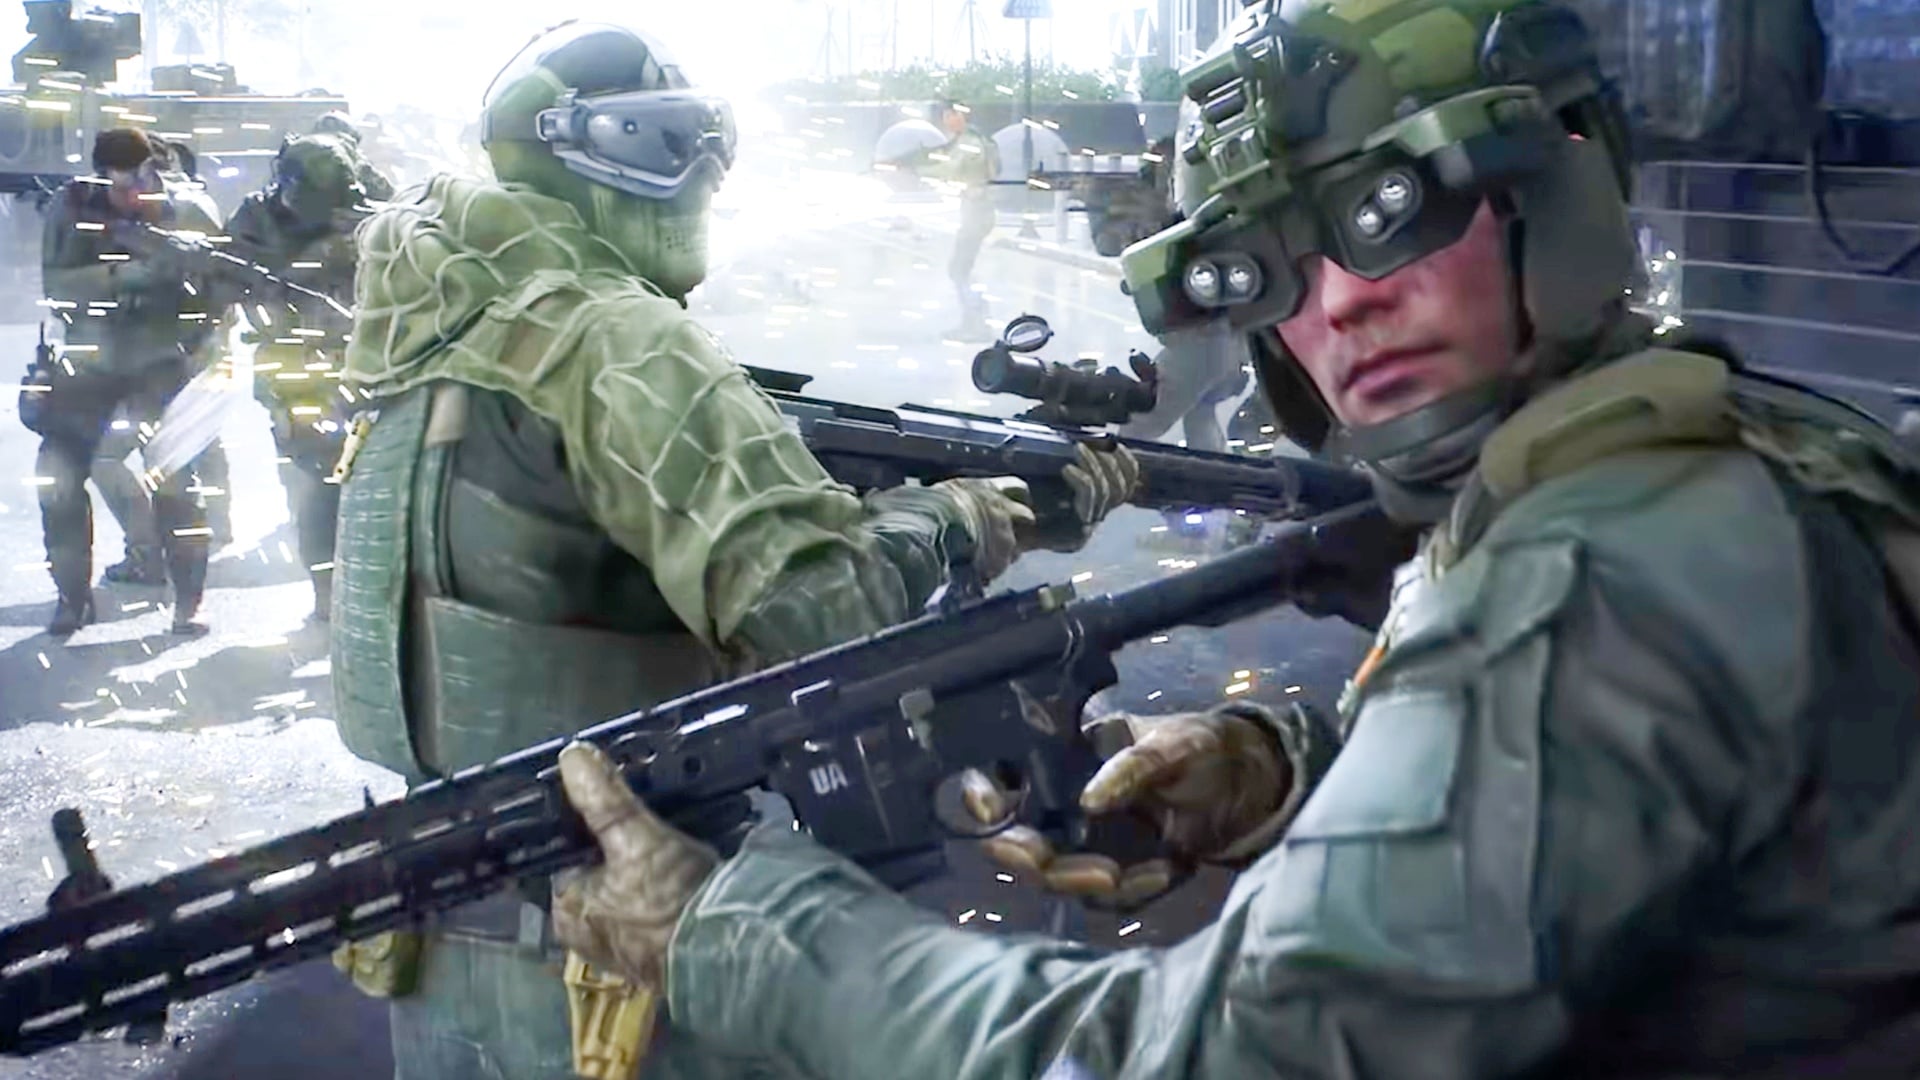 The soldier on the left in the picture is holding the DSR-1. The rifle has a magazine holder in front of the trigger for quick reloading.